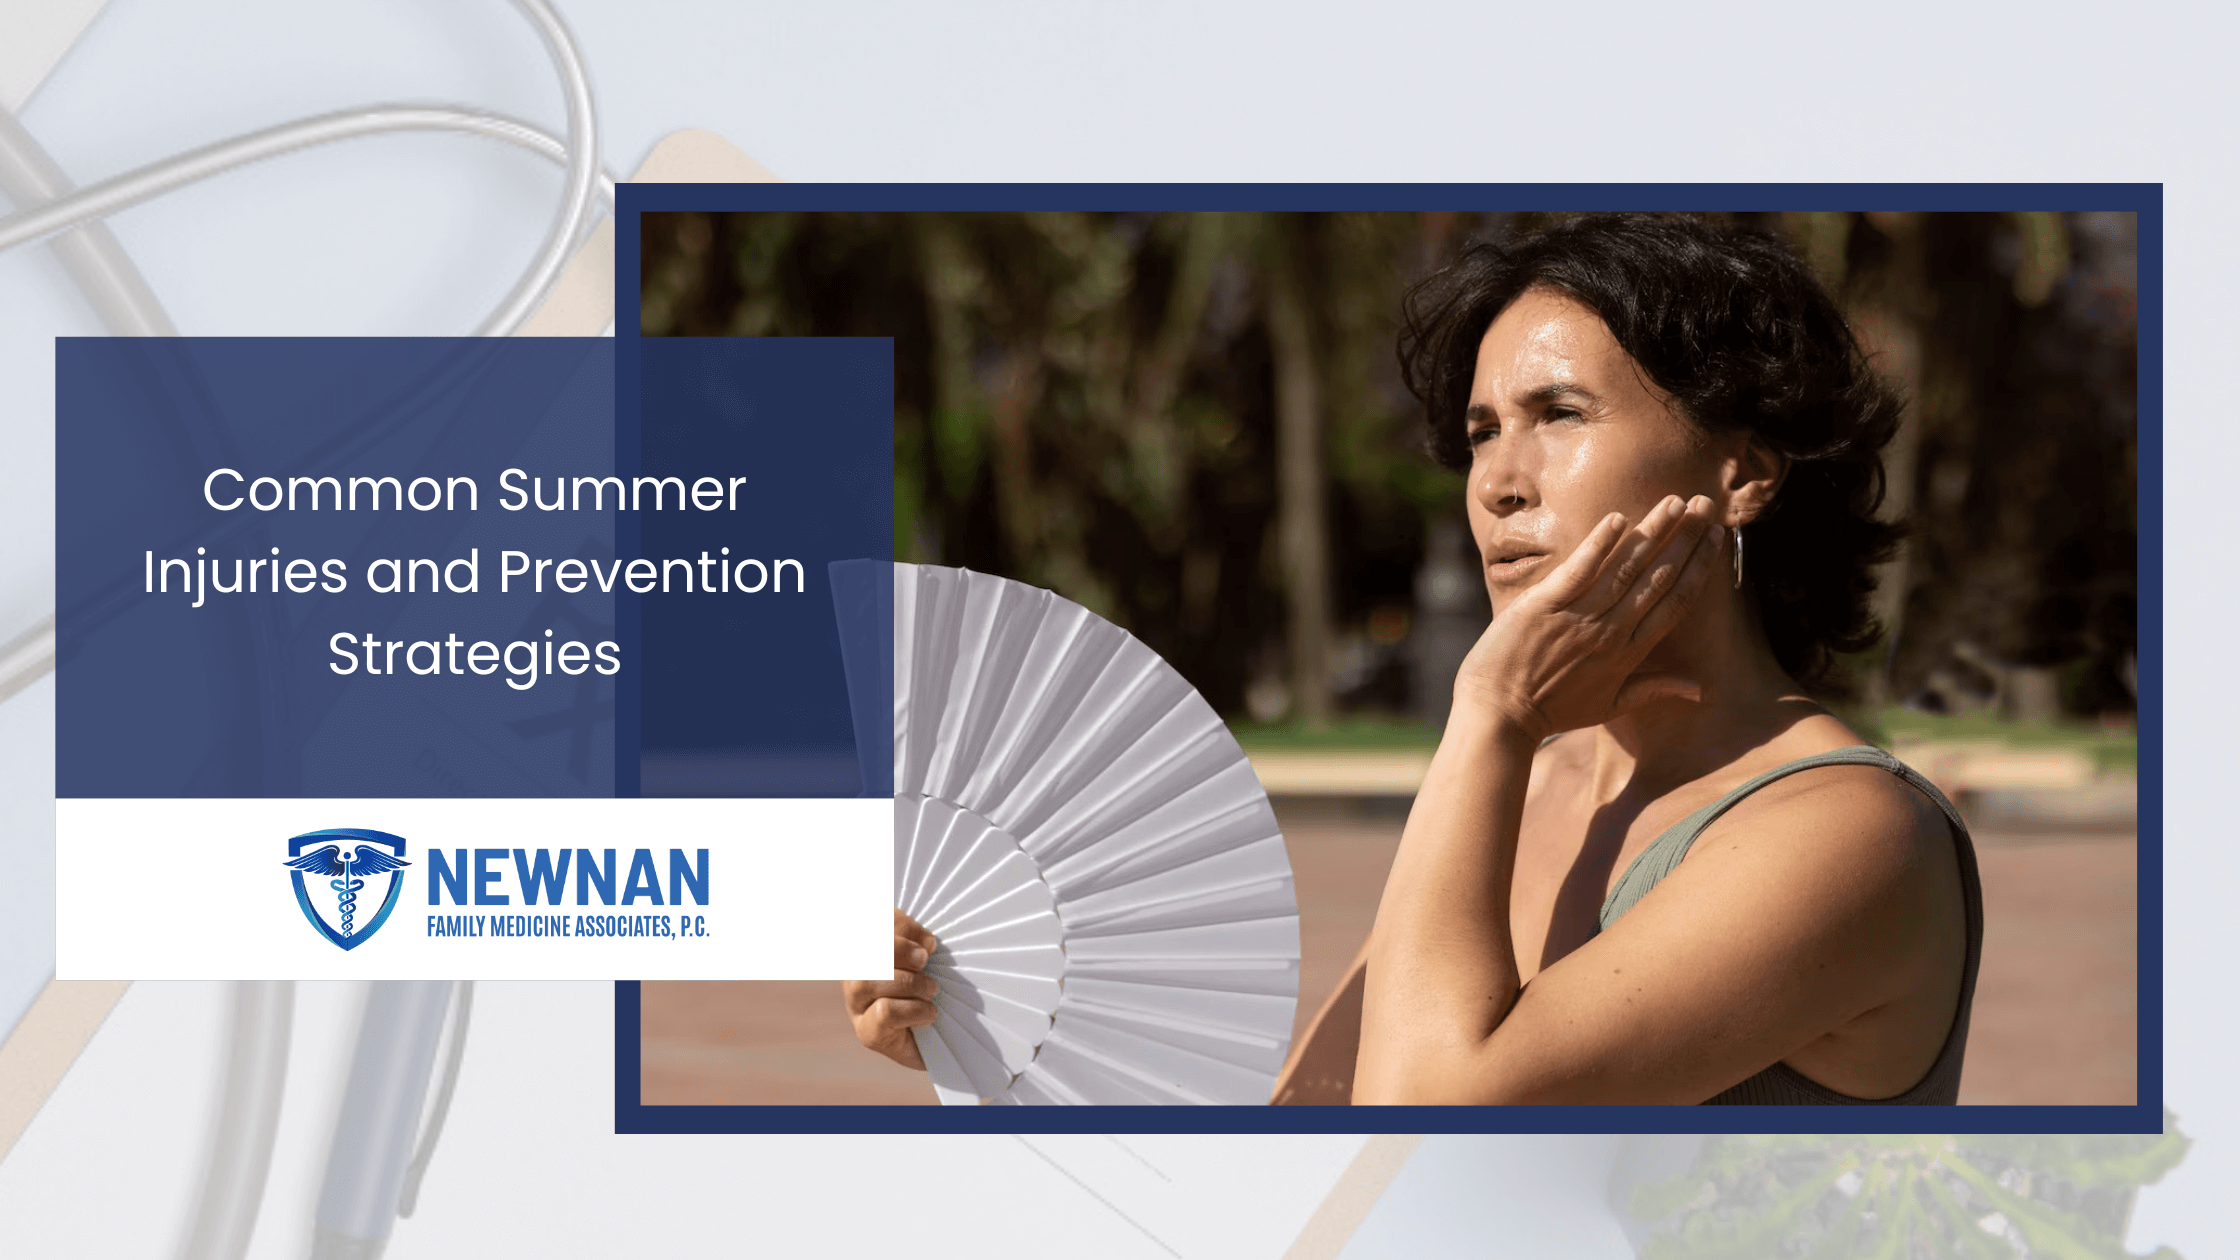 Common Summer Injuries and Prevention Strategies